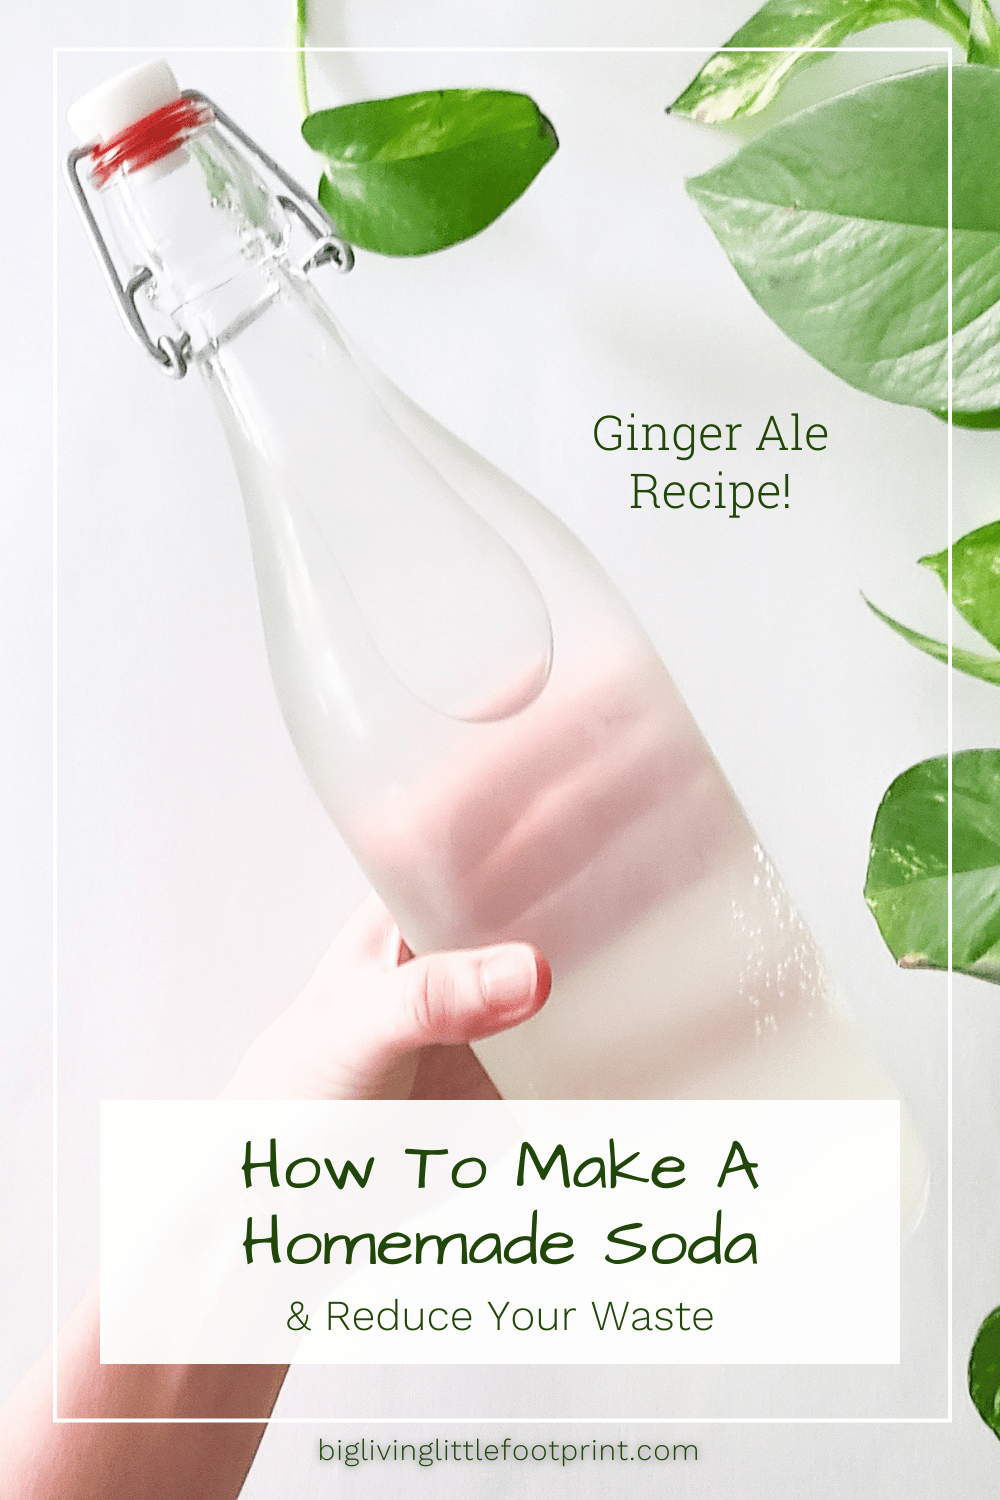 How To Make A Homemade Soda & Reduce Your Waste